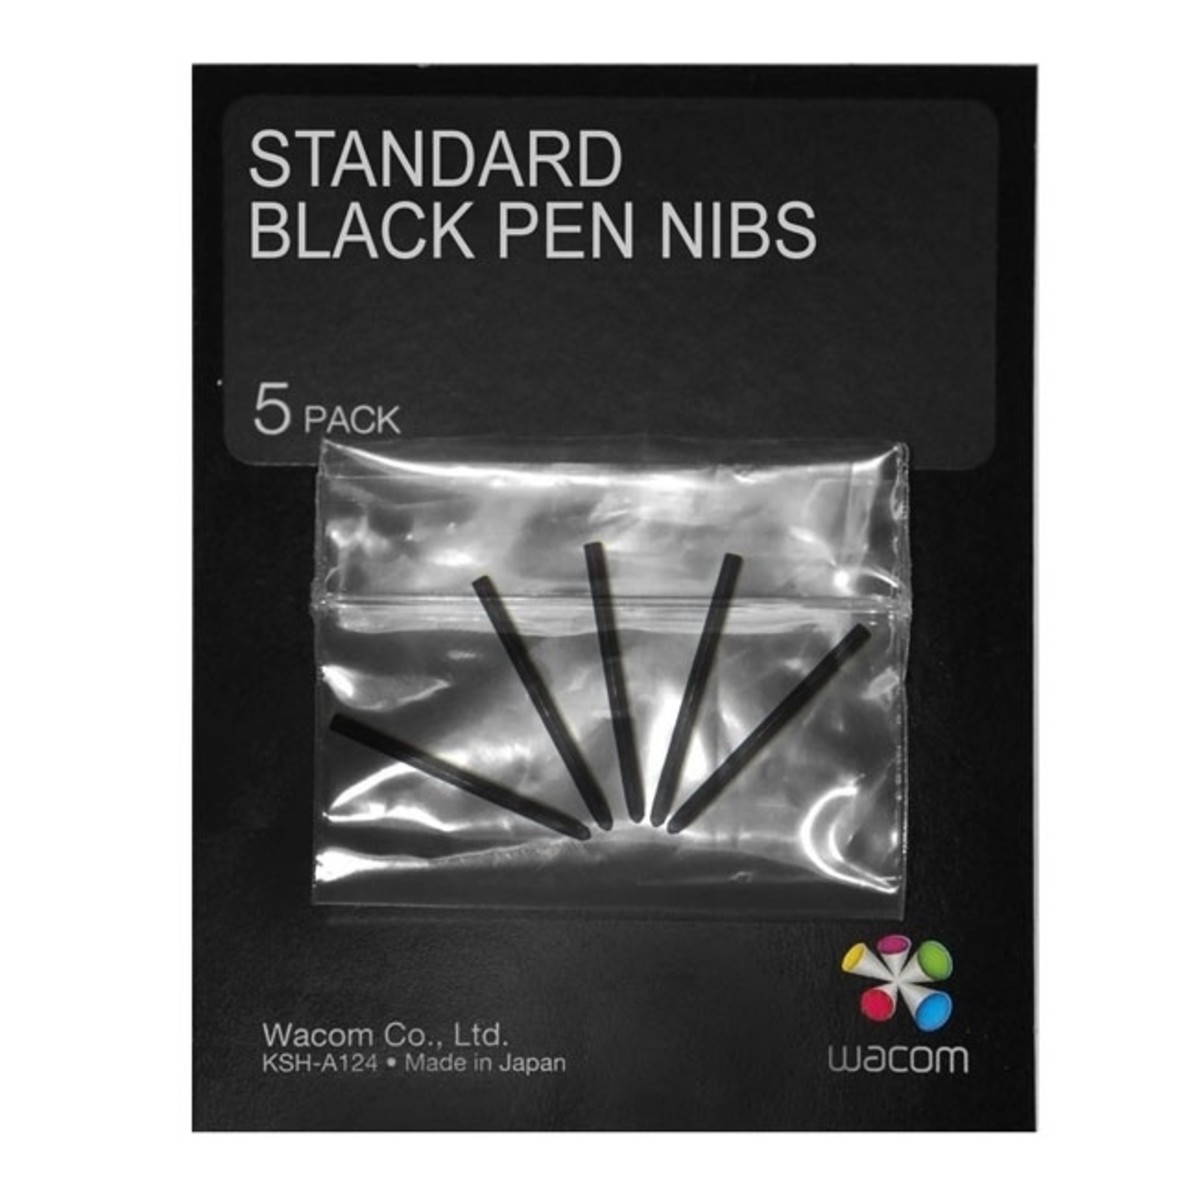 Pen Nibs (5 Pack) for Intuos4/5 - Black